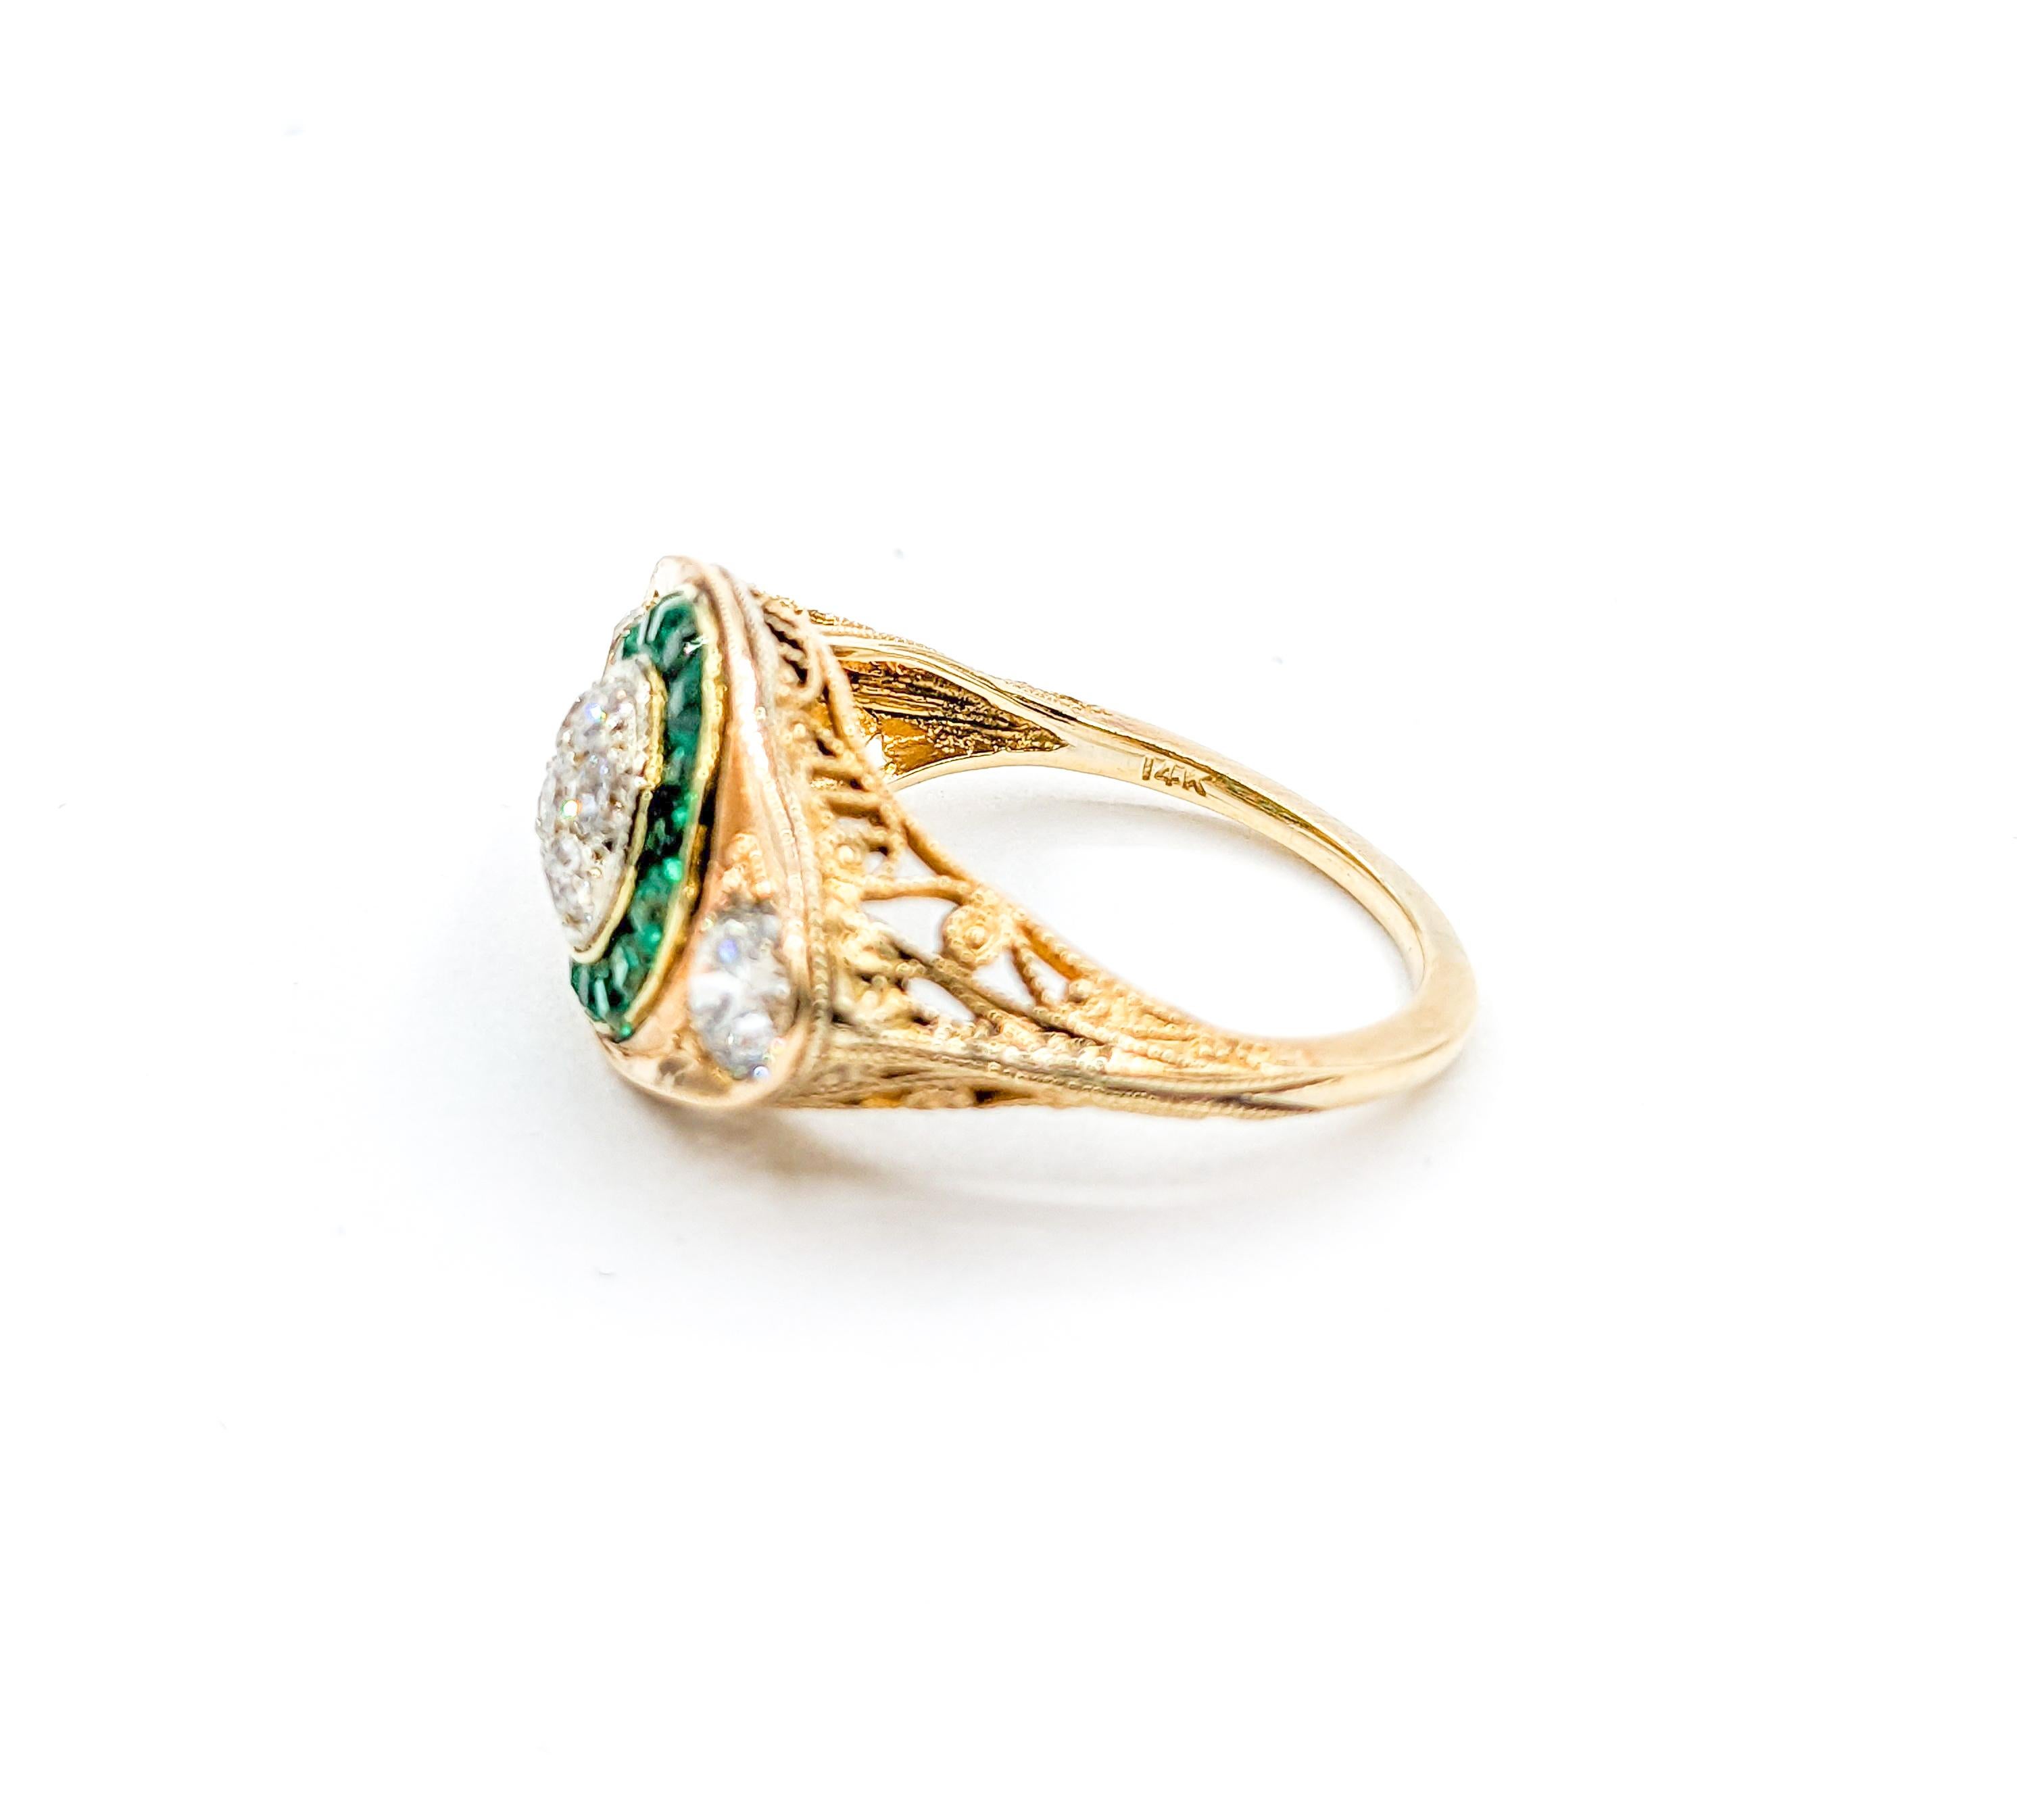 Antique Old European Diamond & Emeralds Target Ring in 14K Gold For Sale 4